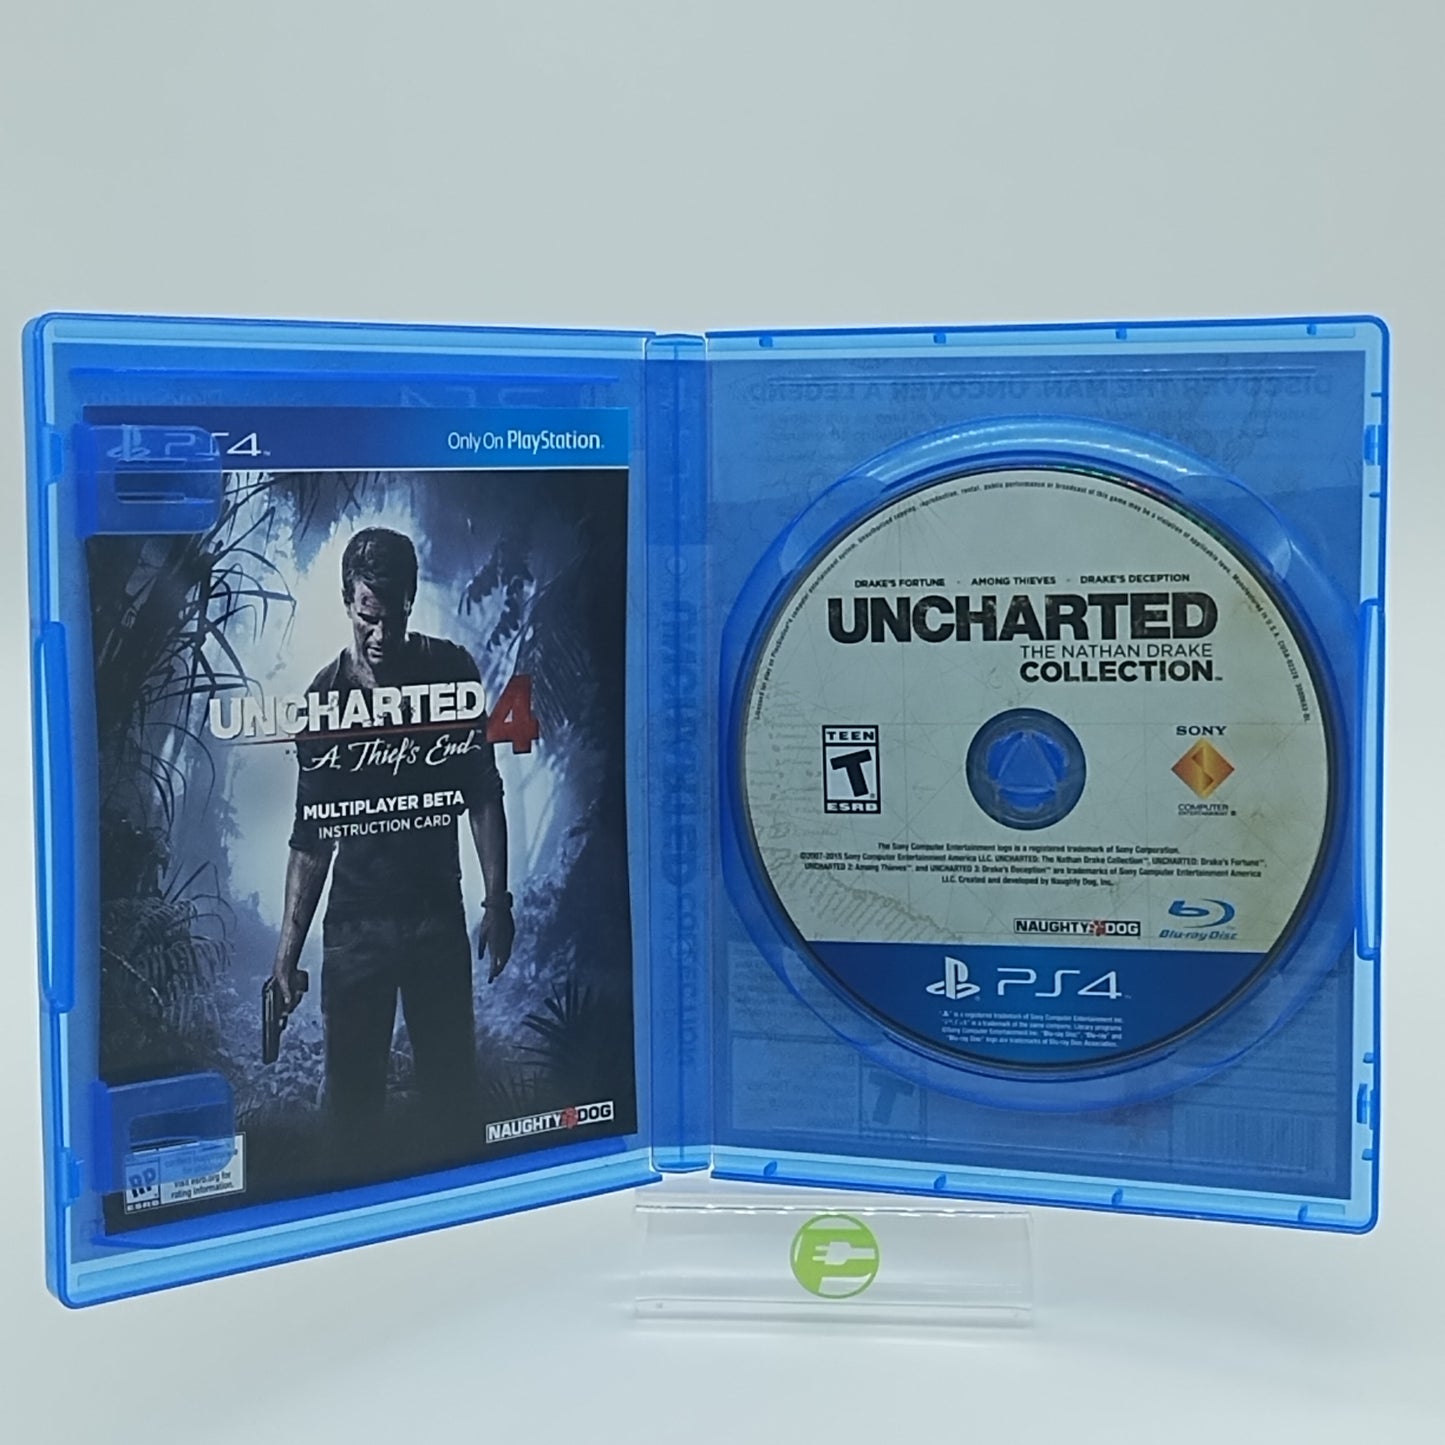 Uncharted 4 & The Nathan Drake Collection (Sony PlayStation 4 PS4)